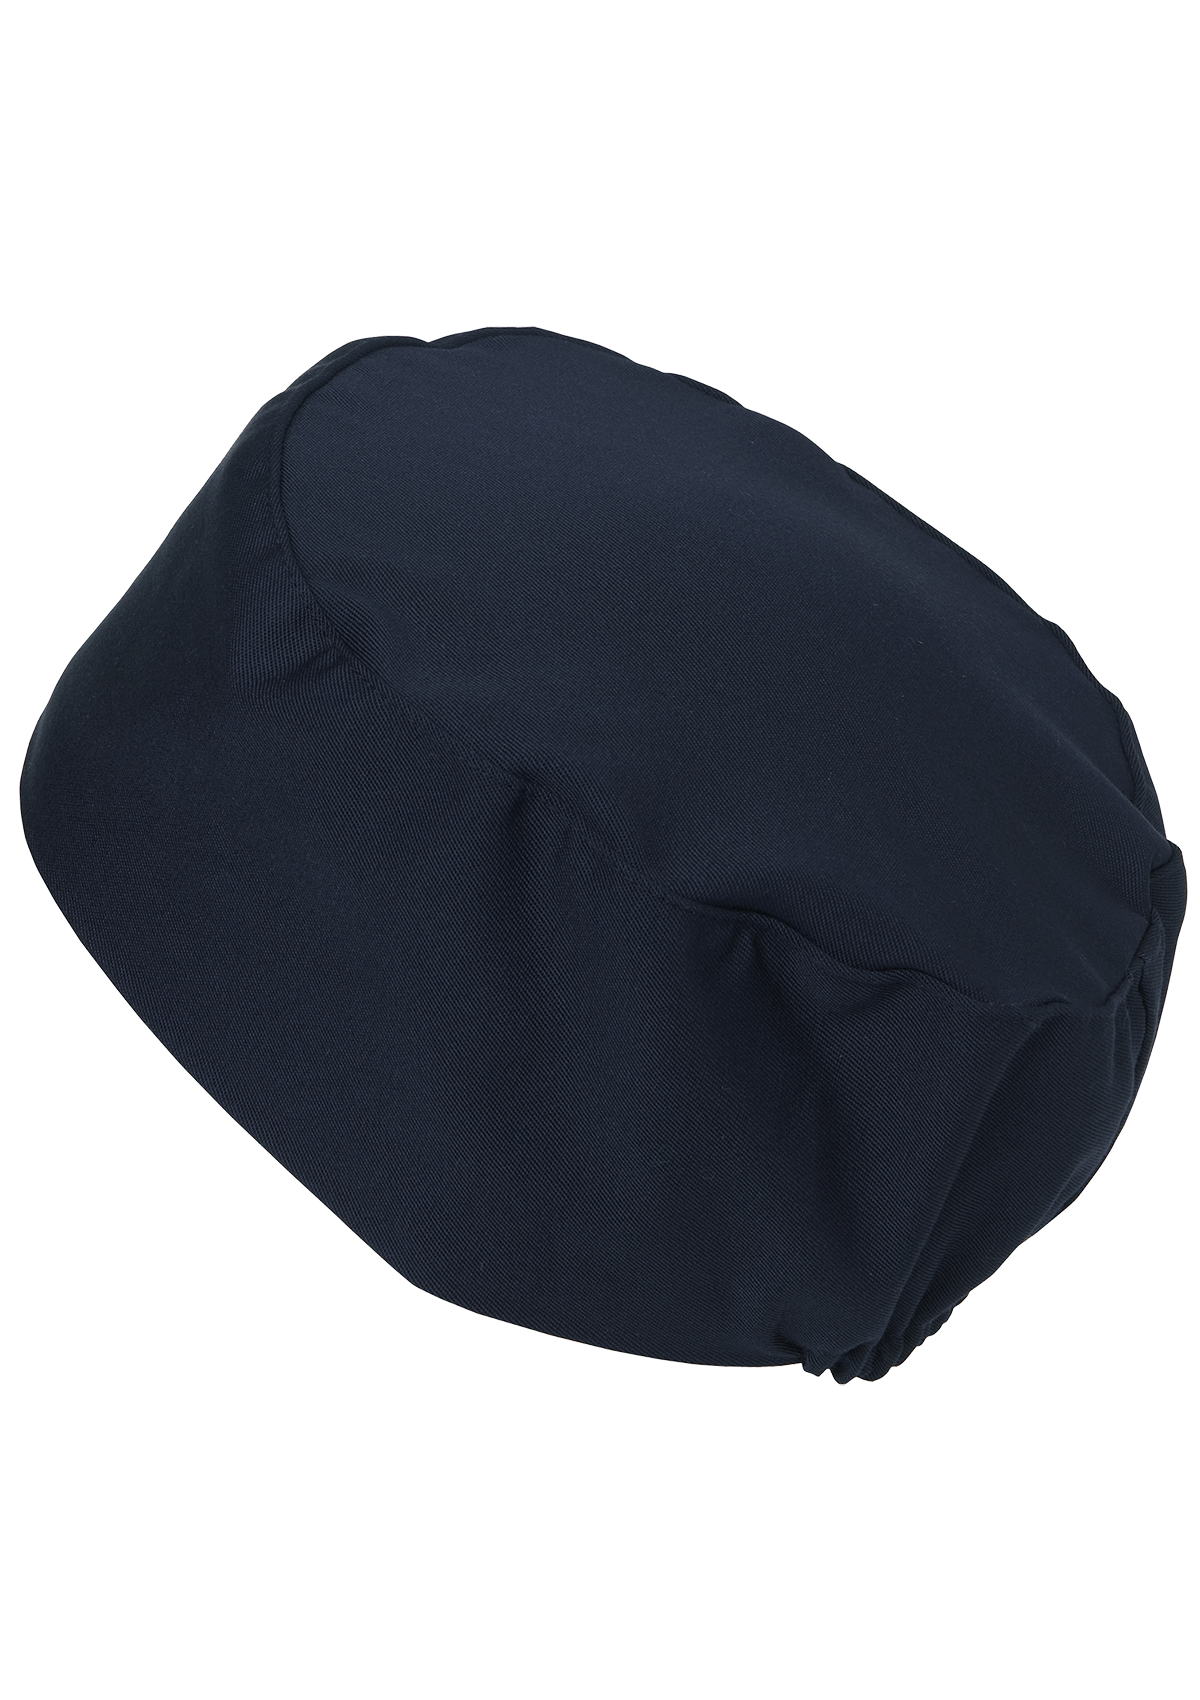 Unisex Chef's hat with elastic back. Segers | Cookniche